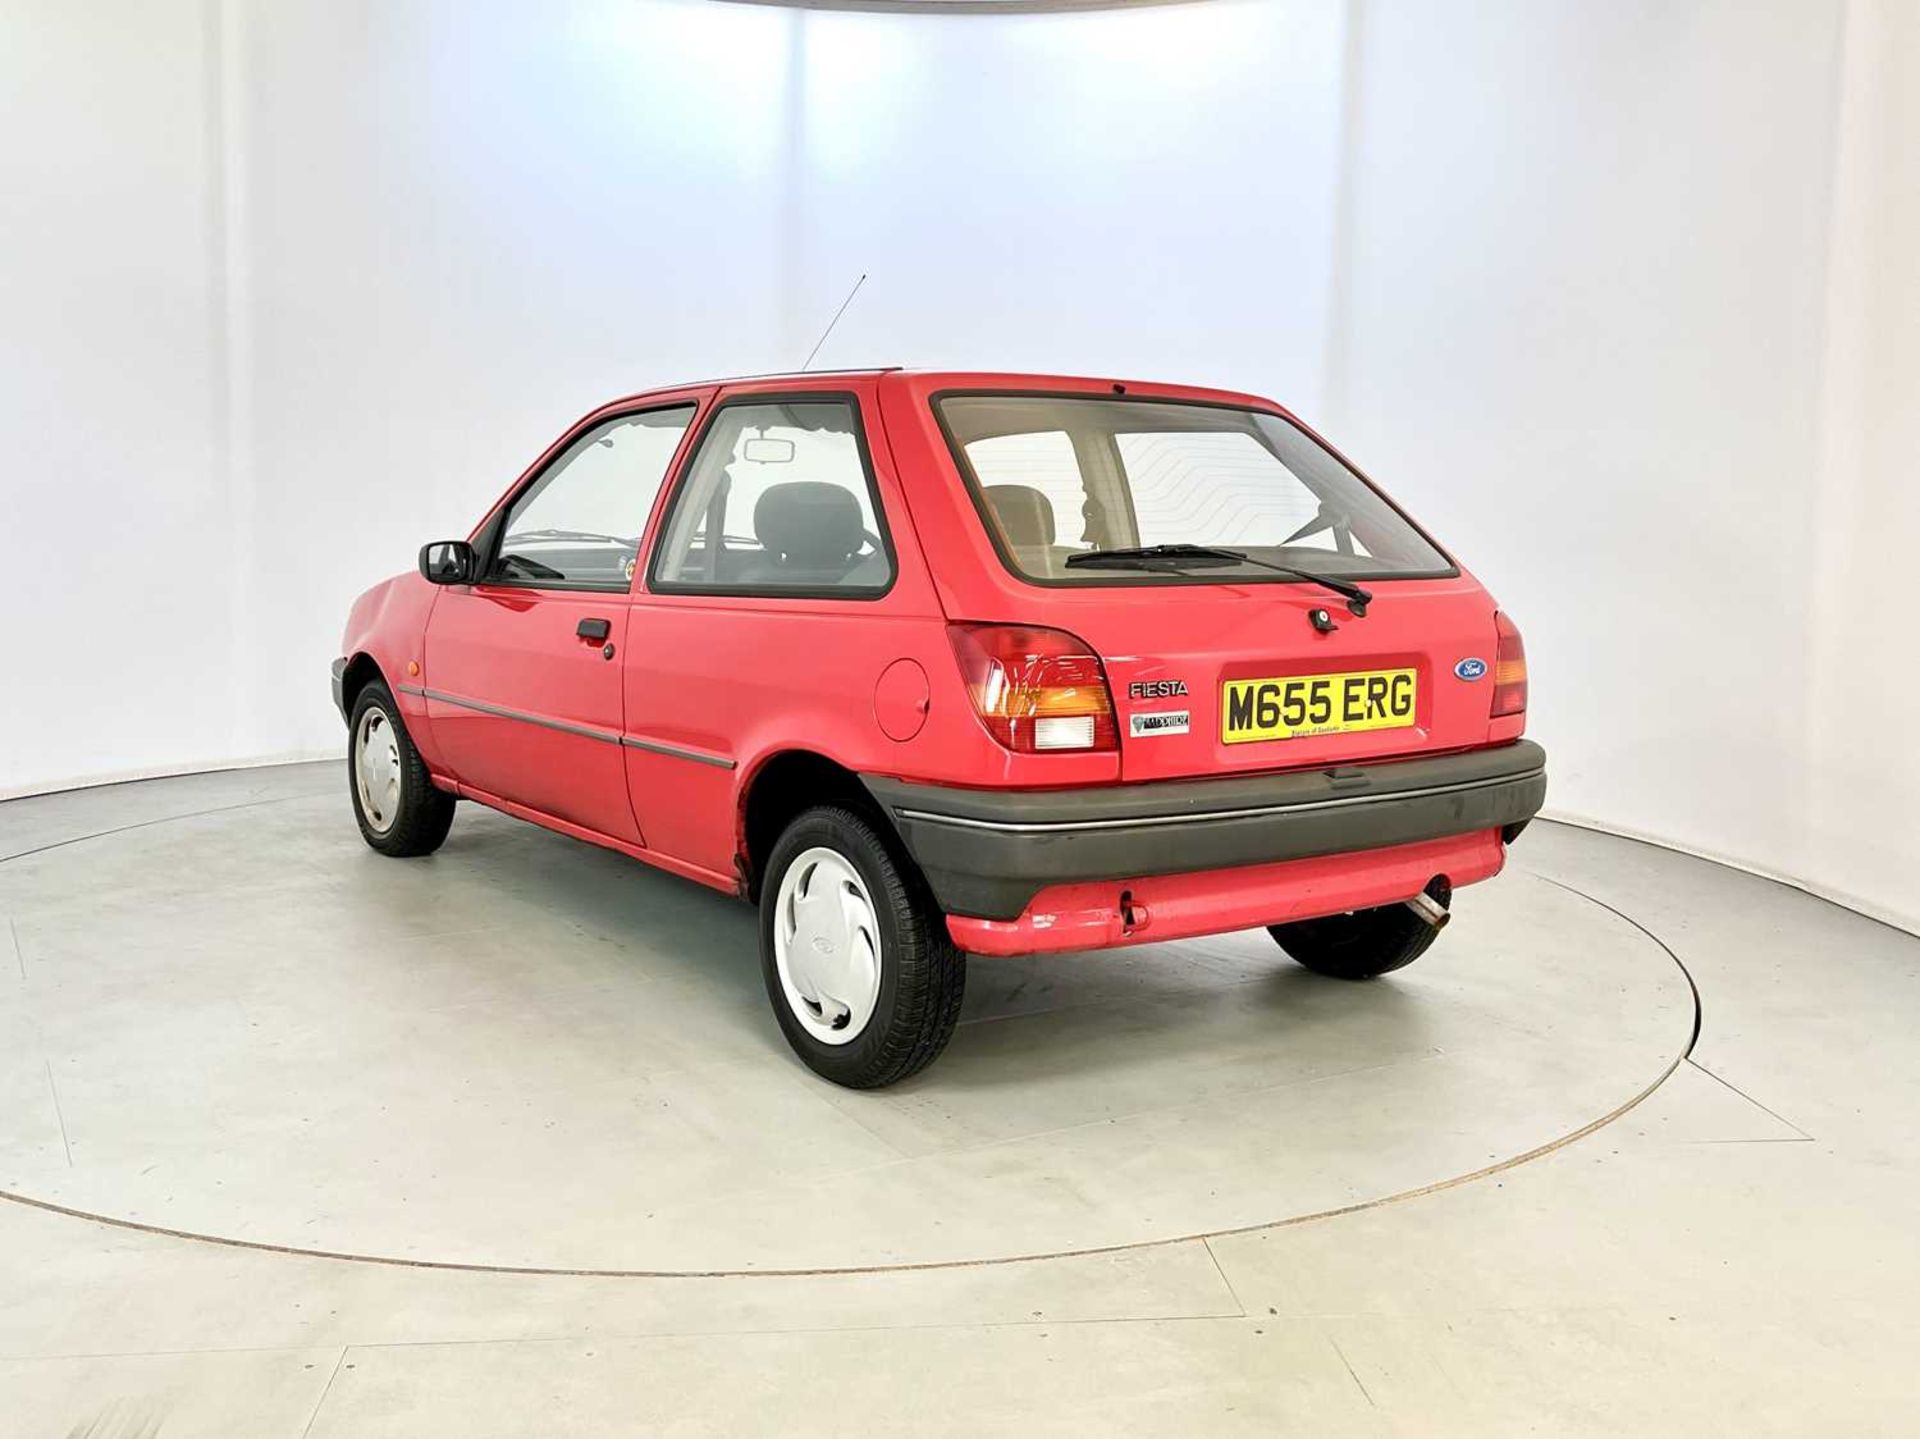 1994 Ford Fiesta Sapphire - Image 7 of 27